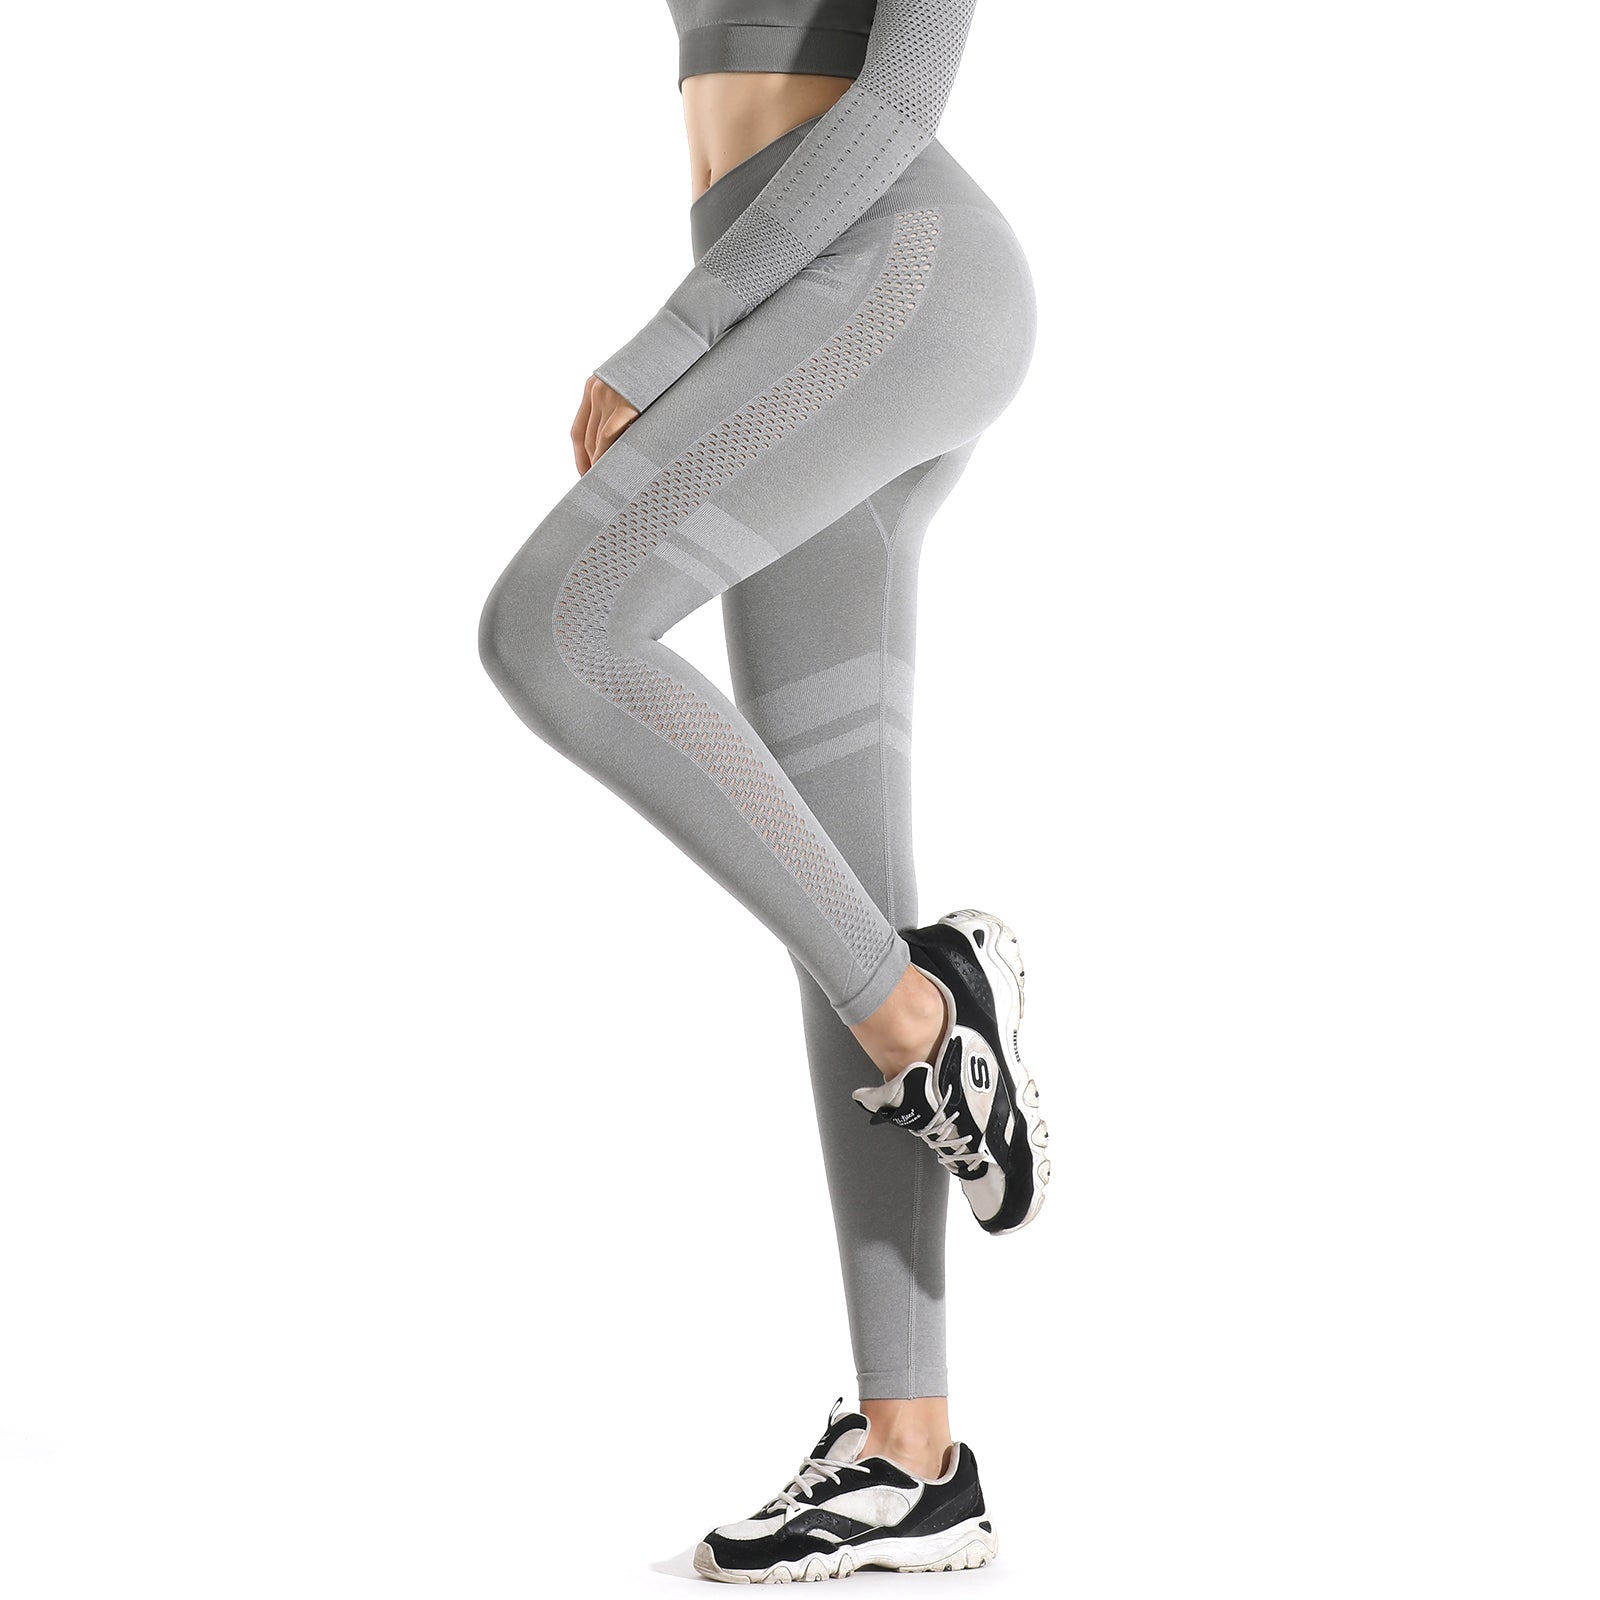 Pro-Fit Seamless High Fashion Sports Top